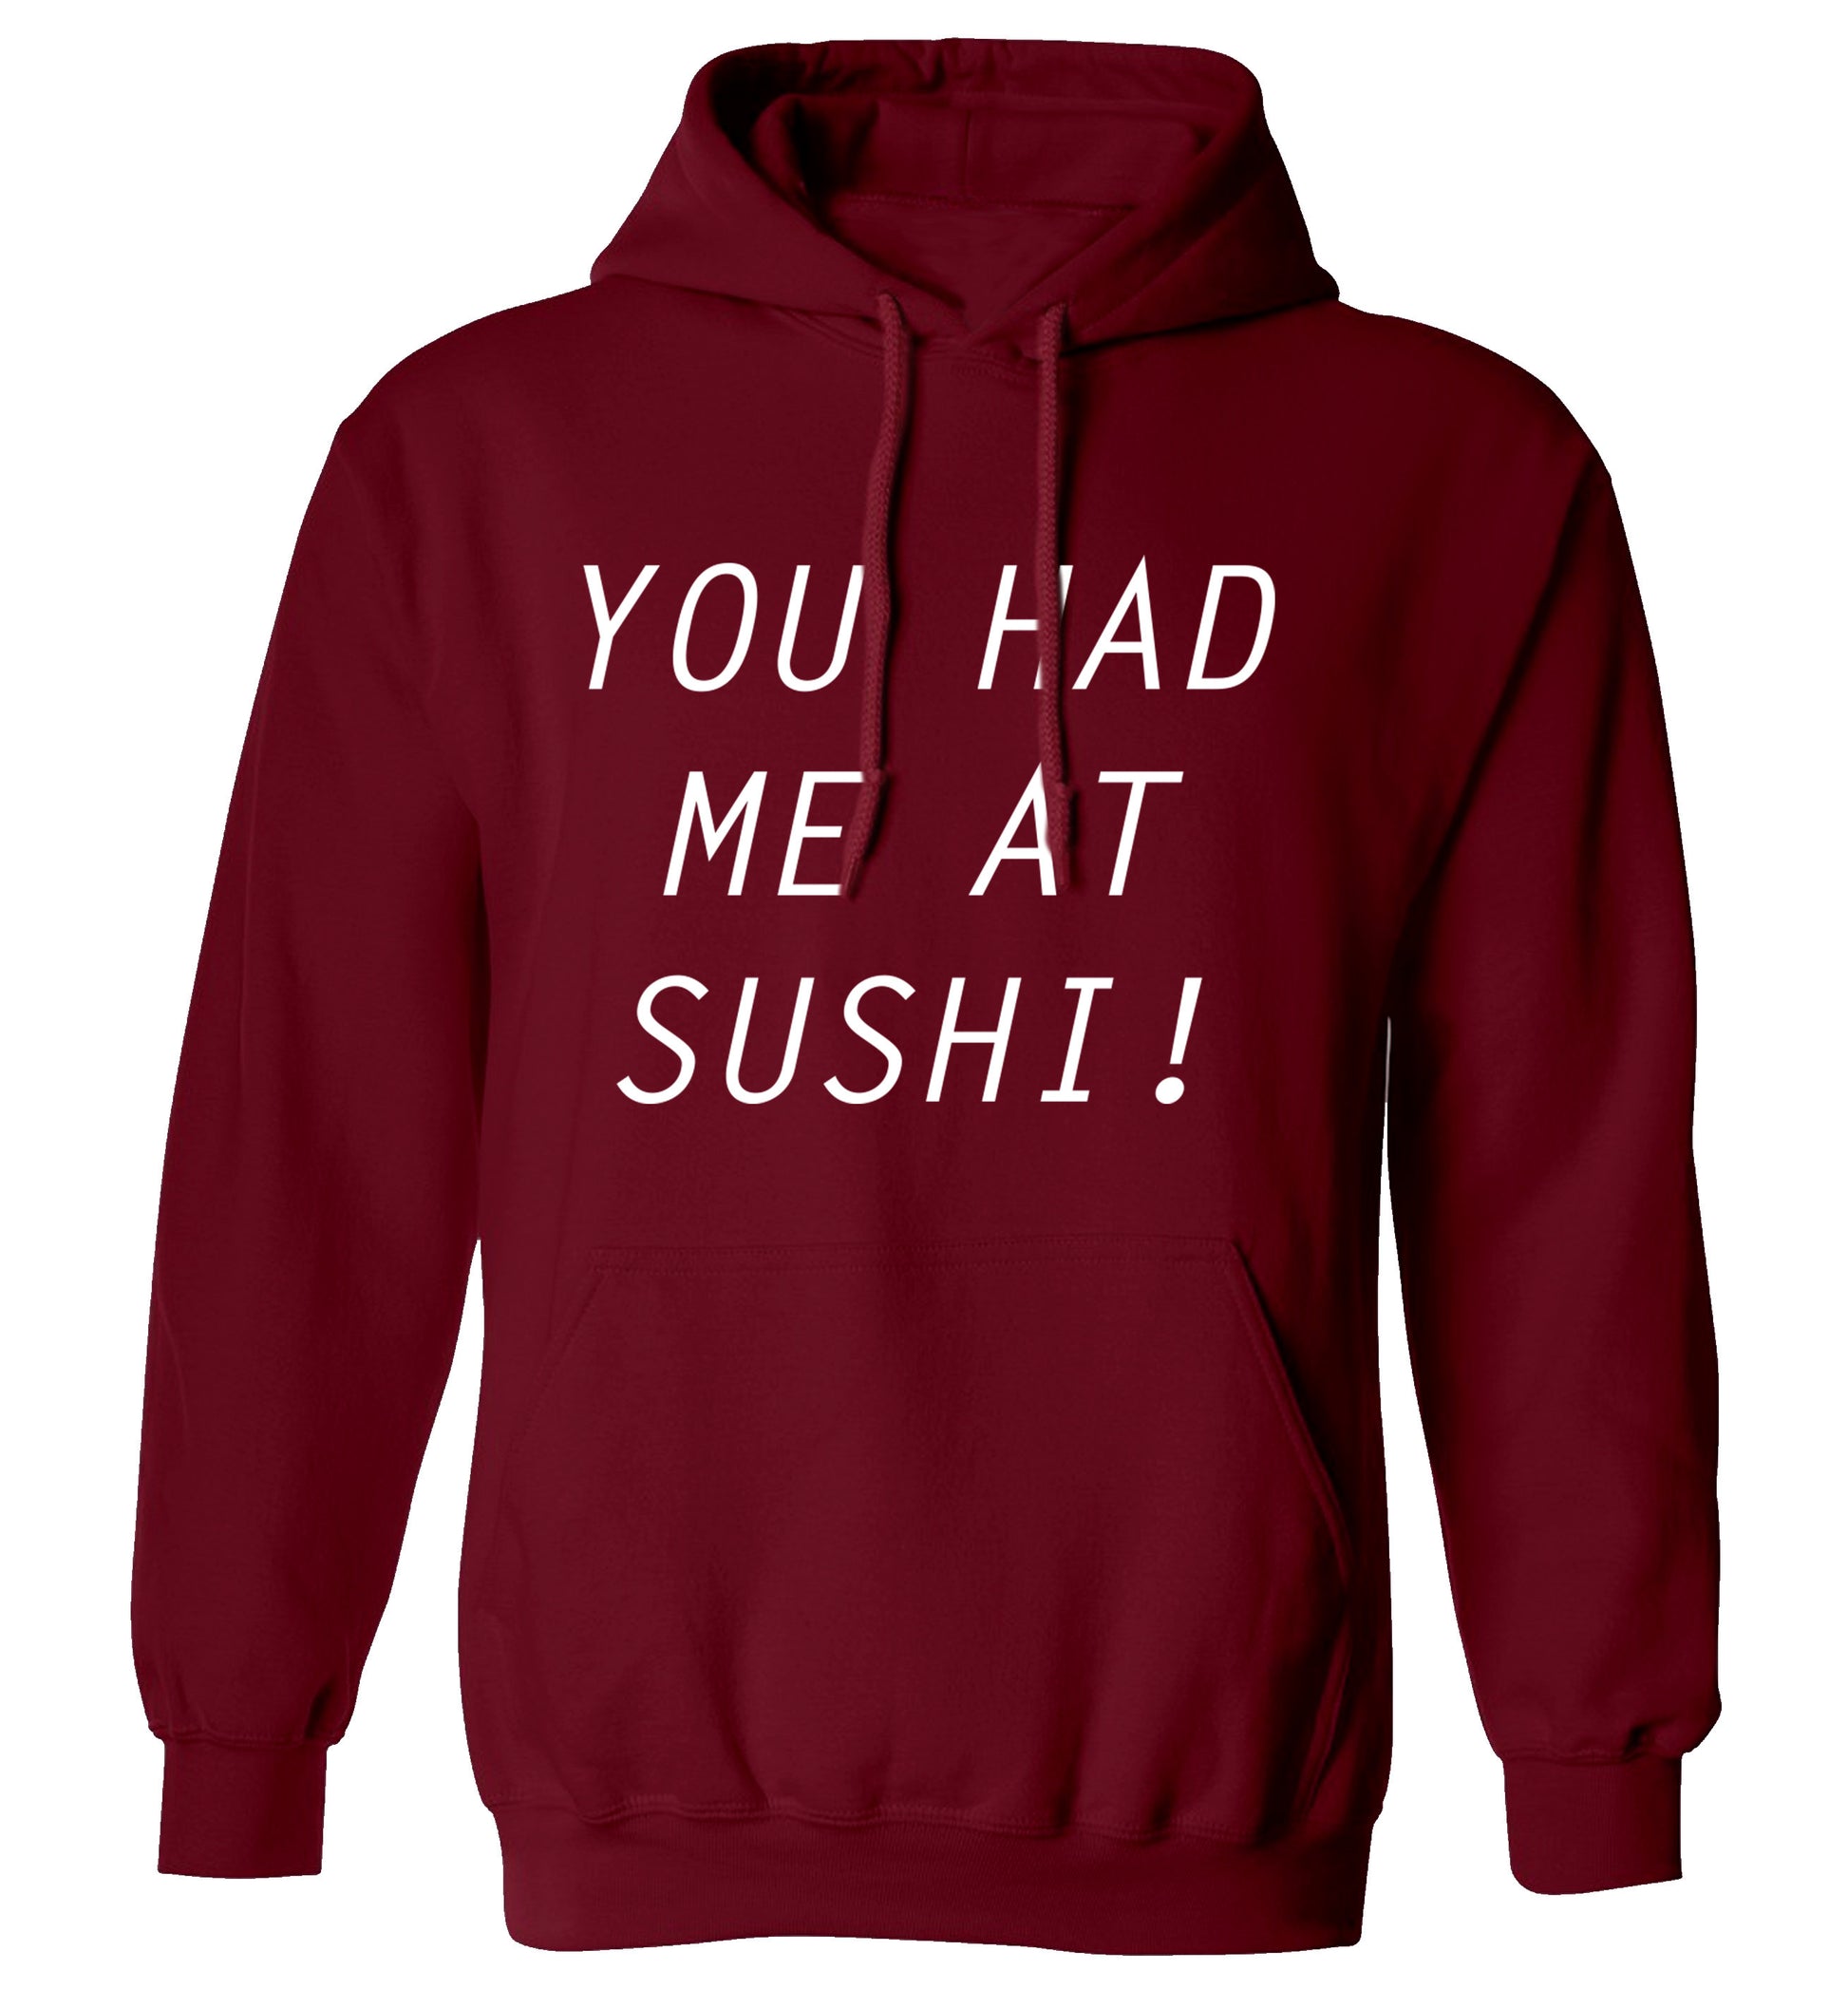 You had me at sushi adults unisex maroon hoodie 2XL